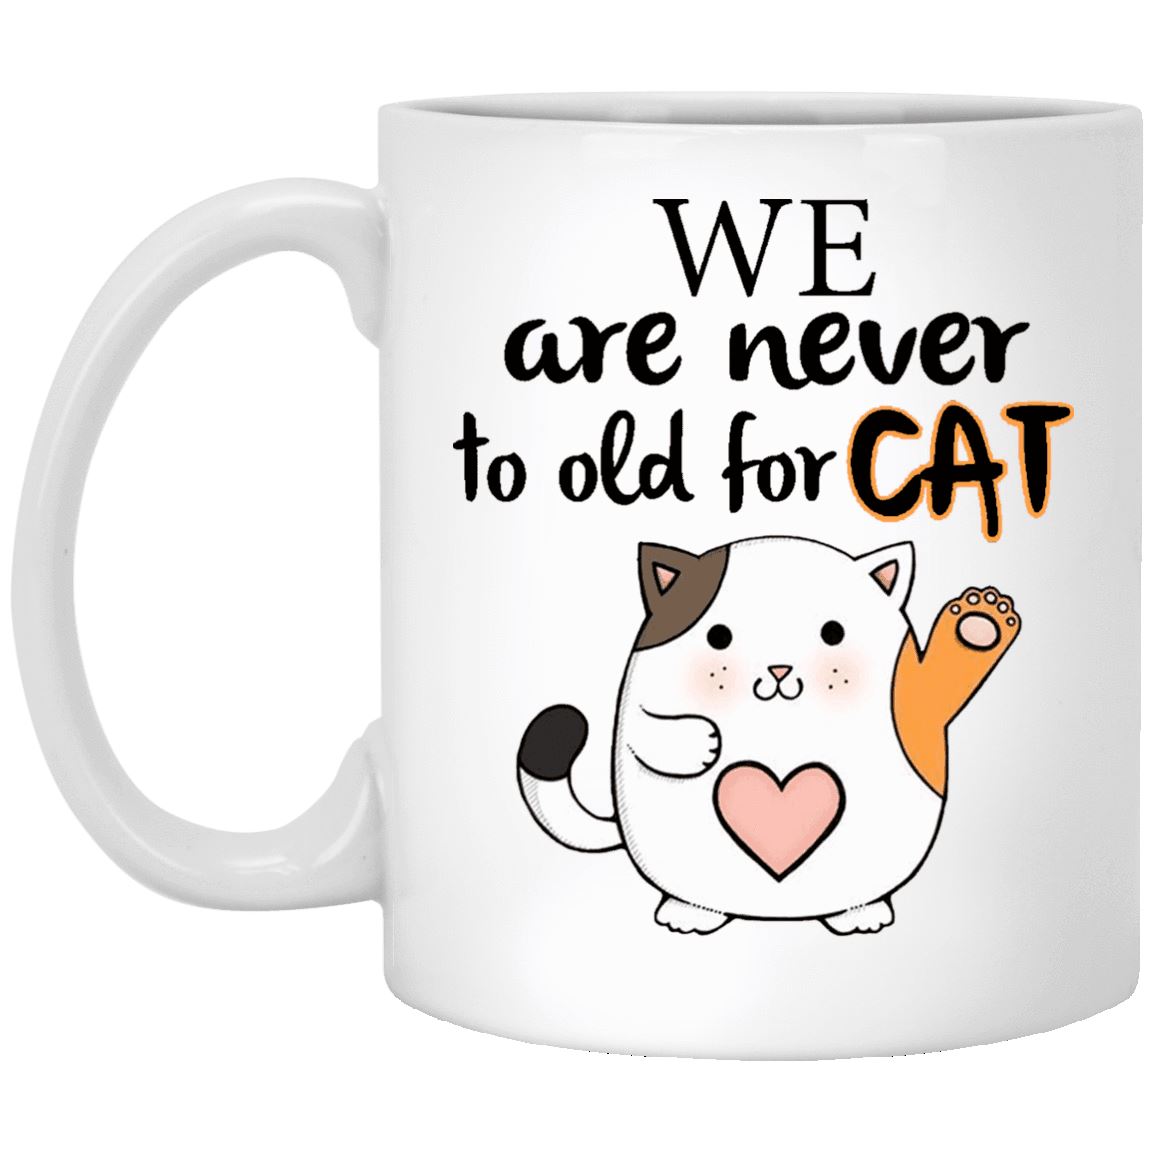 Cat Mug - We Are Never To Old For Cat